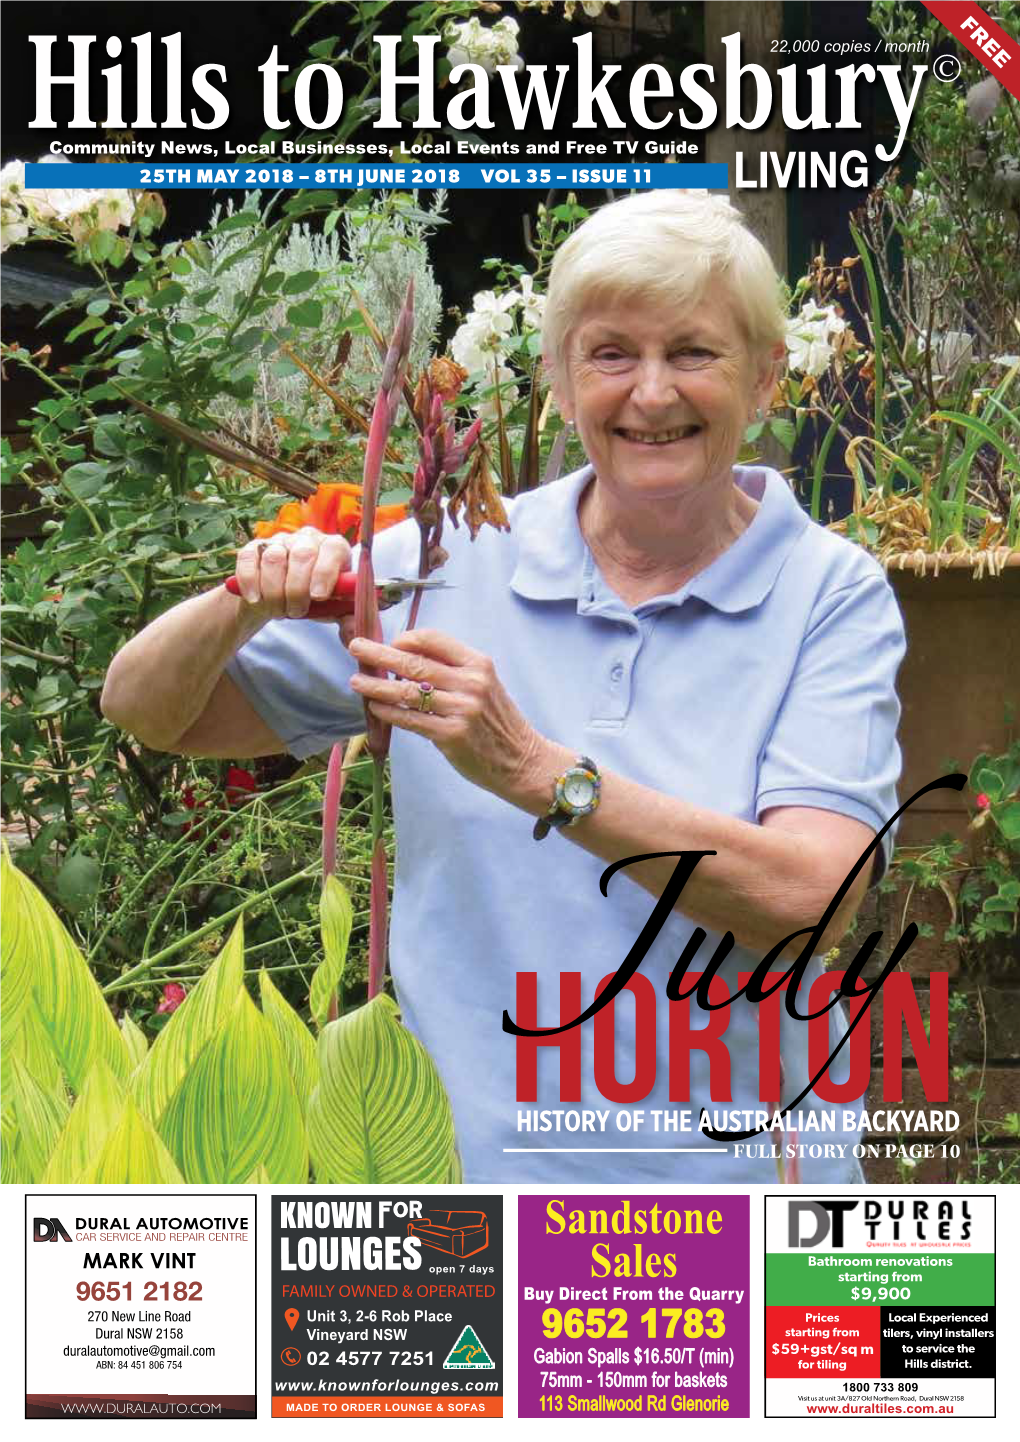 25 May 2018 | Hills to Hawkesbury Living Read Online: Art & Entertainment